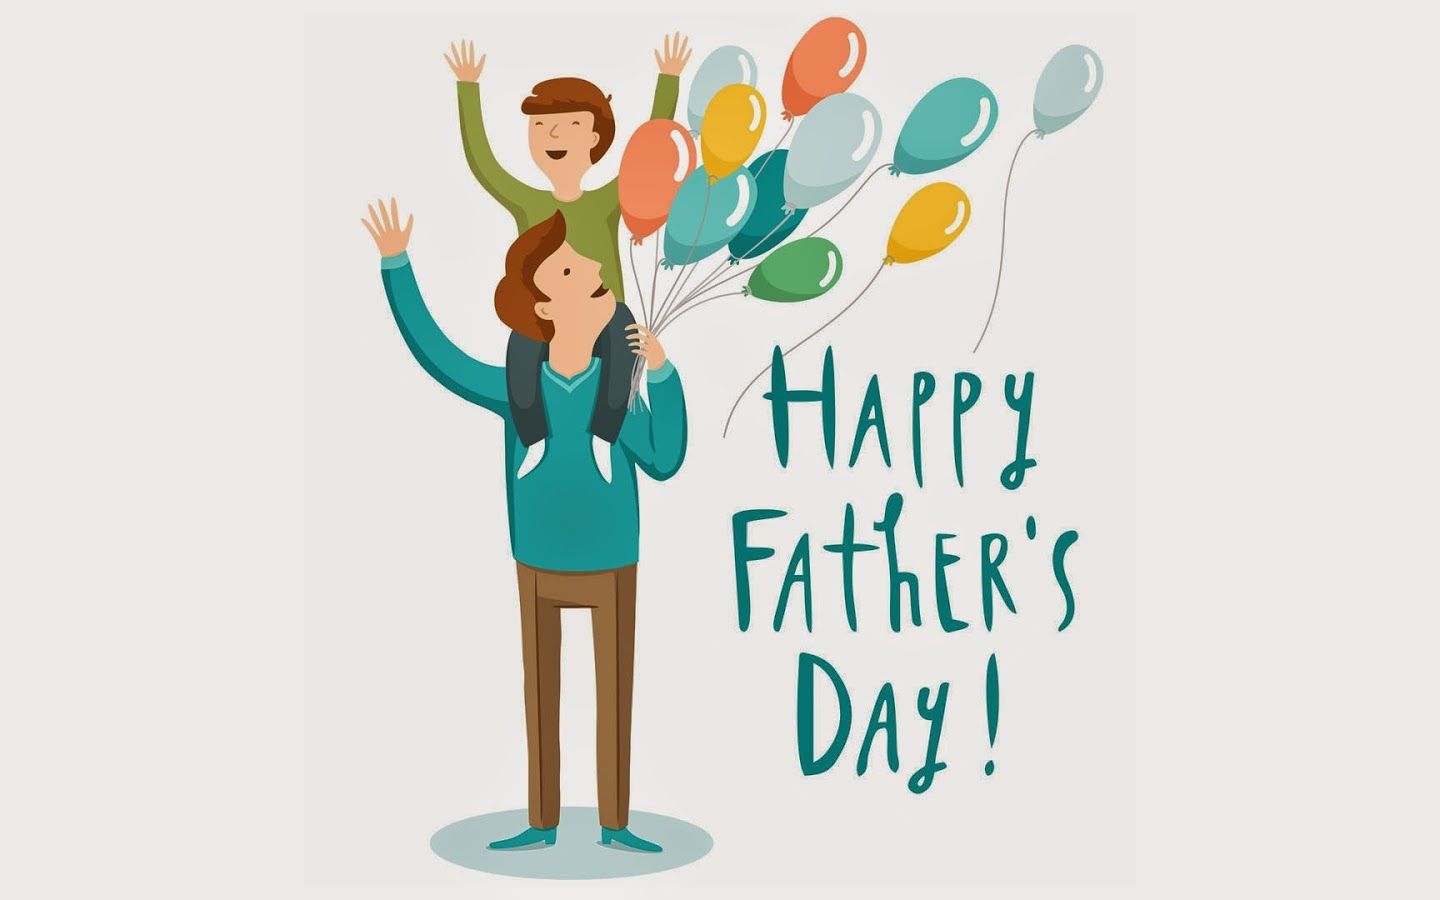 Free download Happy Fathers Day Image 2019 Fathers Day Picture